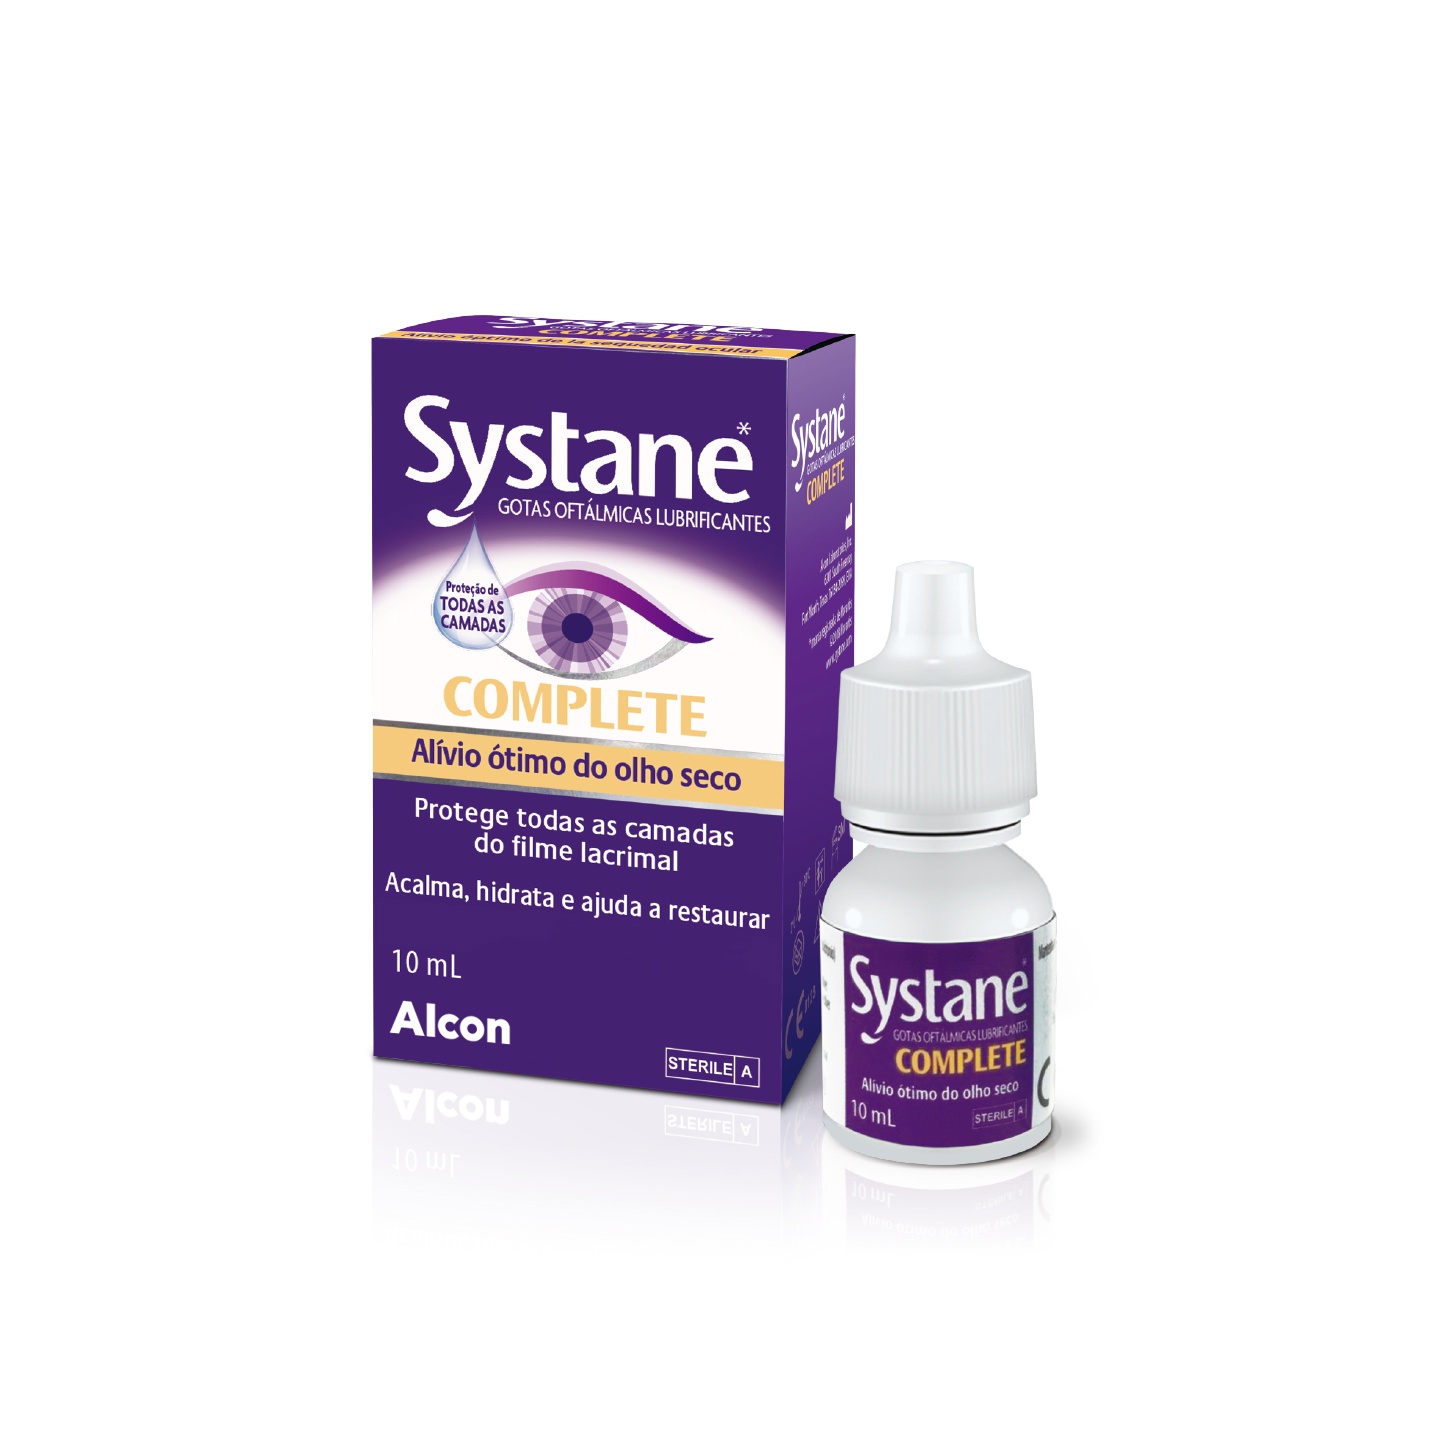 SYSTANE-COMPLETE_2019-PT-01-2021